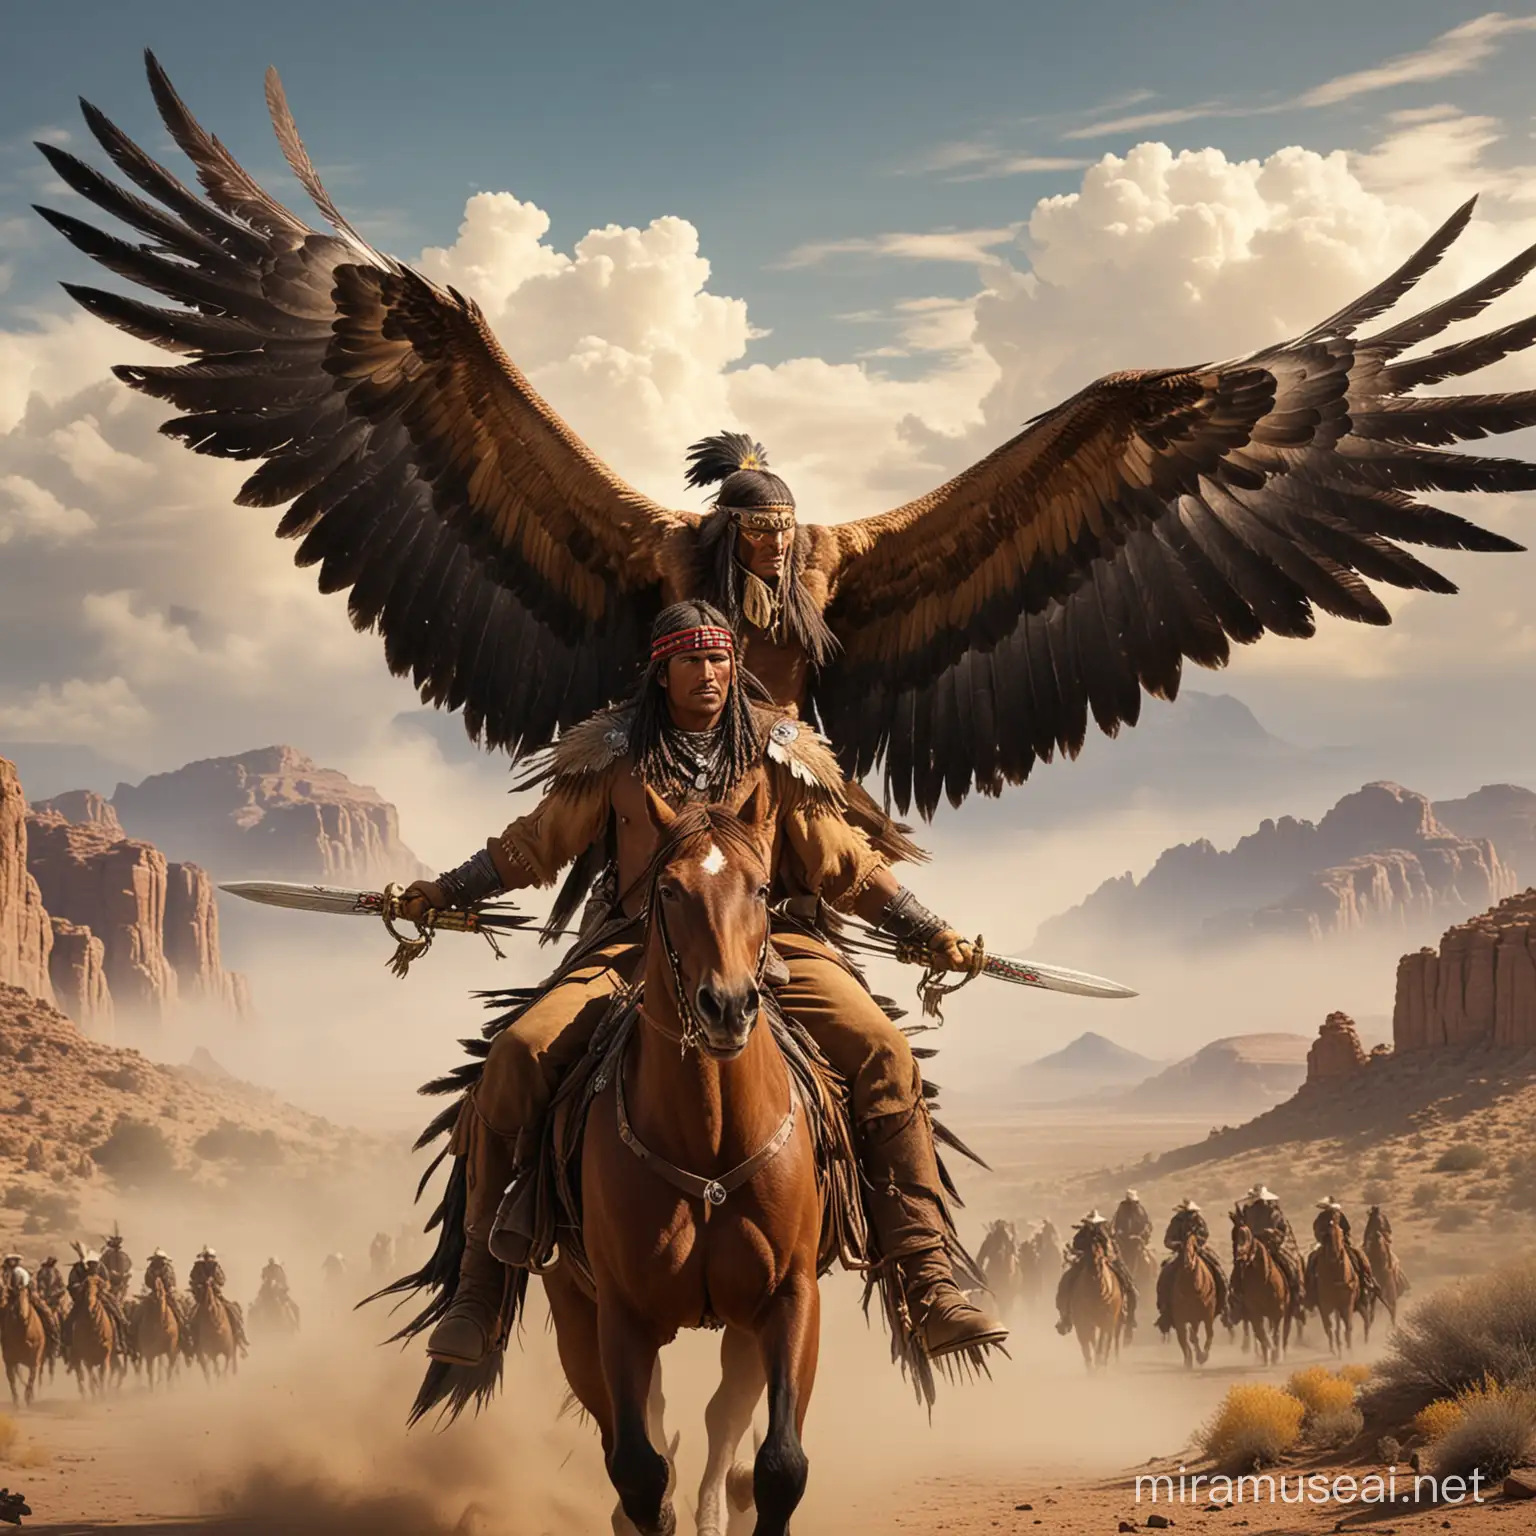 Tall Apache Warrior Riding with Majestic Eagle and Pursued by Cowboy